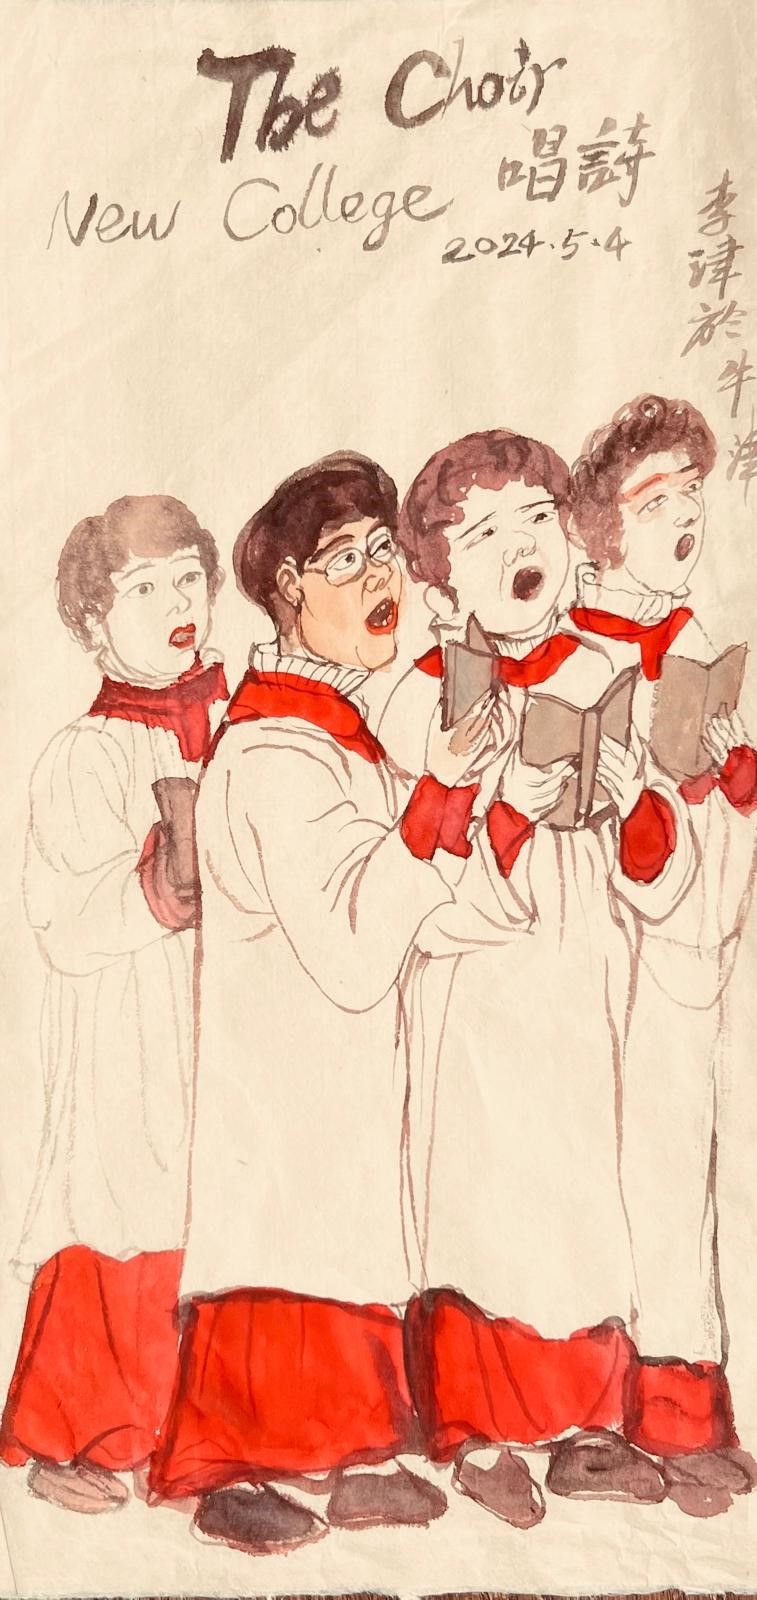 Watercolour of four New College choristers by Li Jin